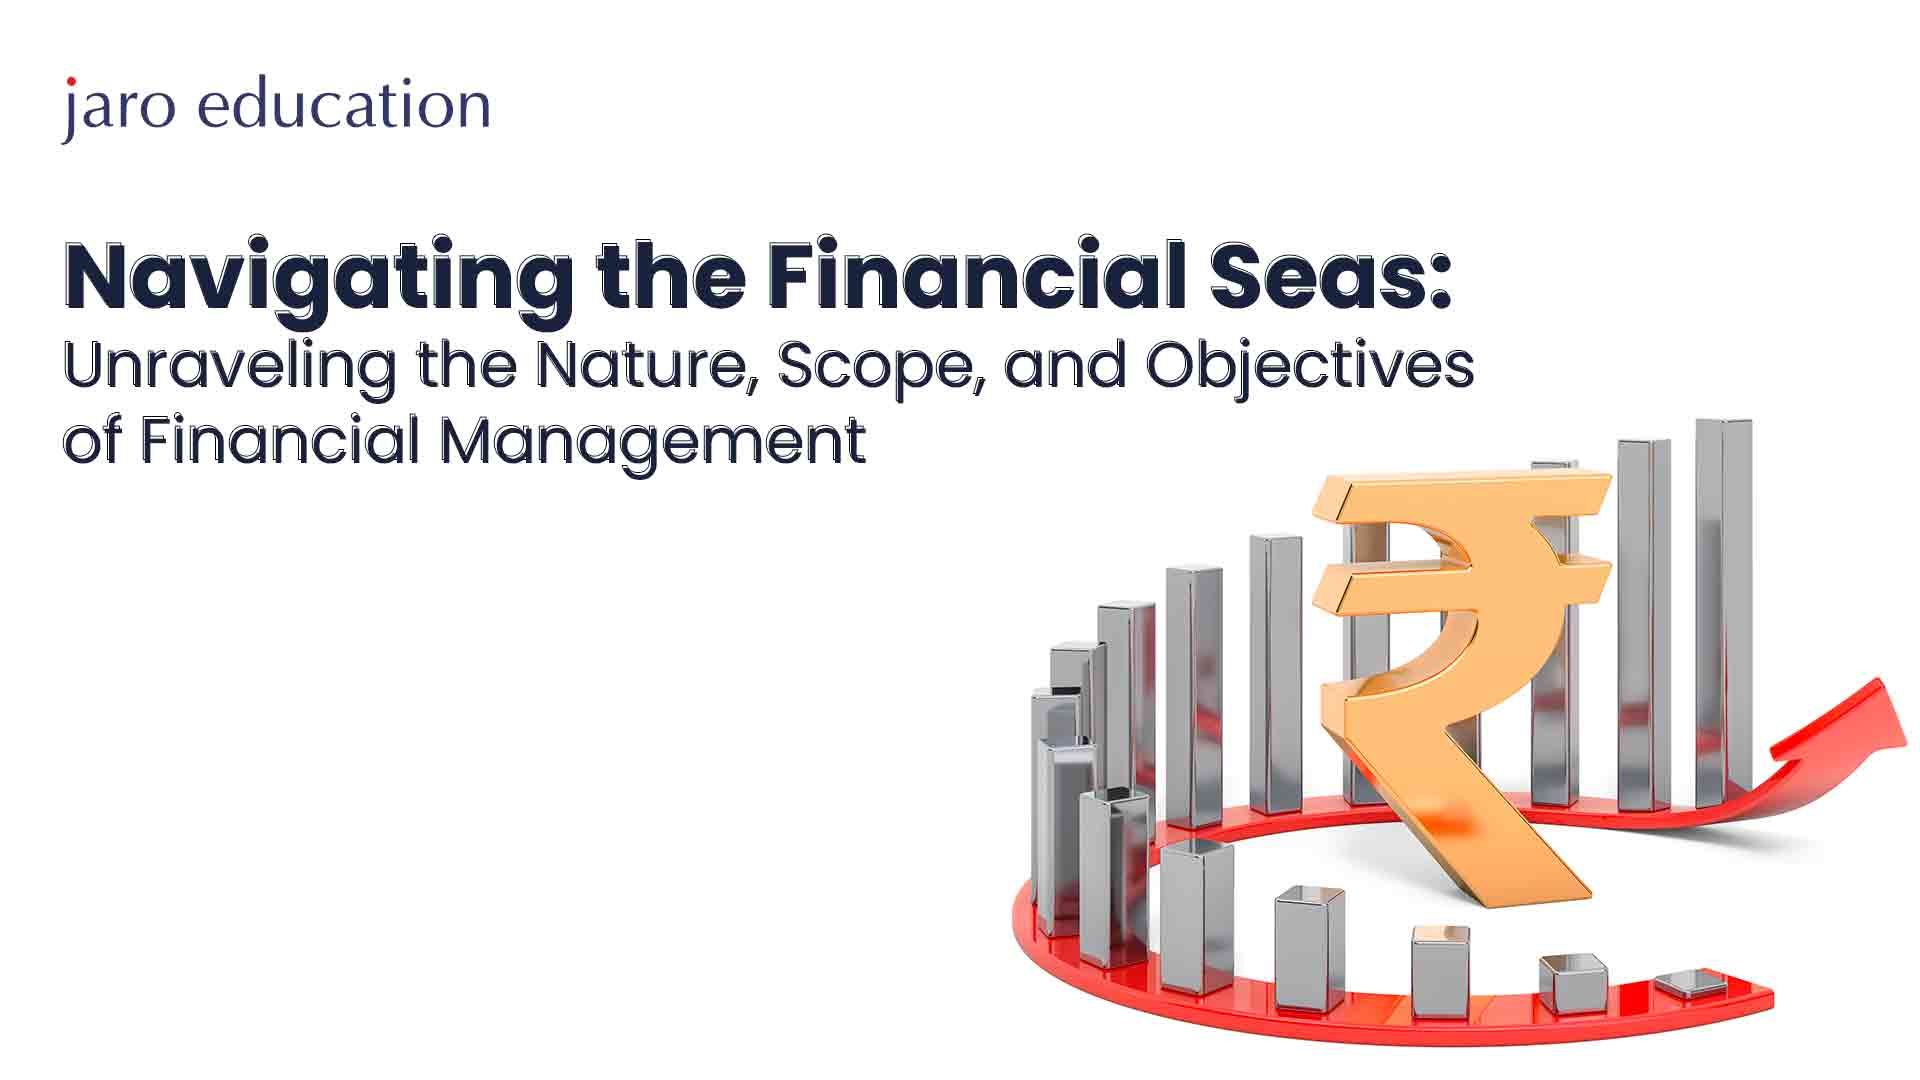 Navigating-the-Financial-Seas-Unraveling-the-Nature-Scope-and-Objectives-of-Financial-Management